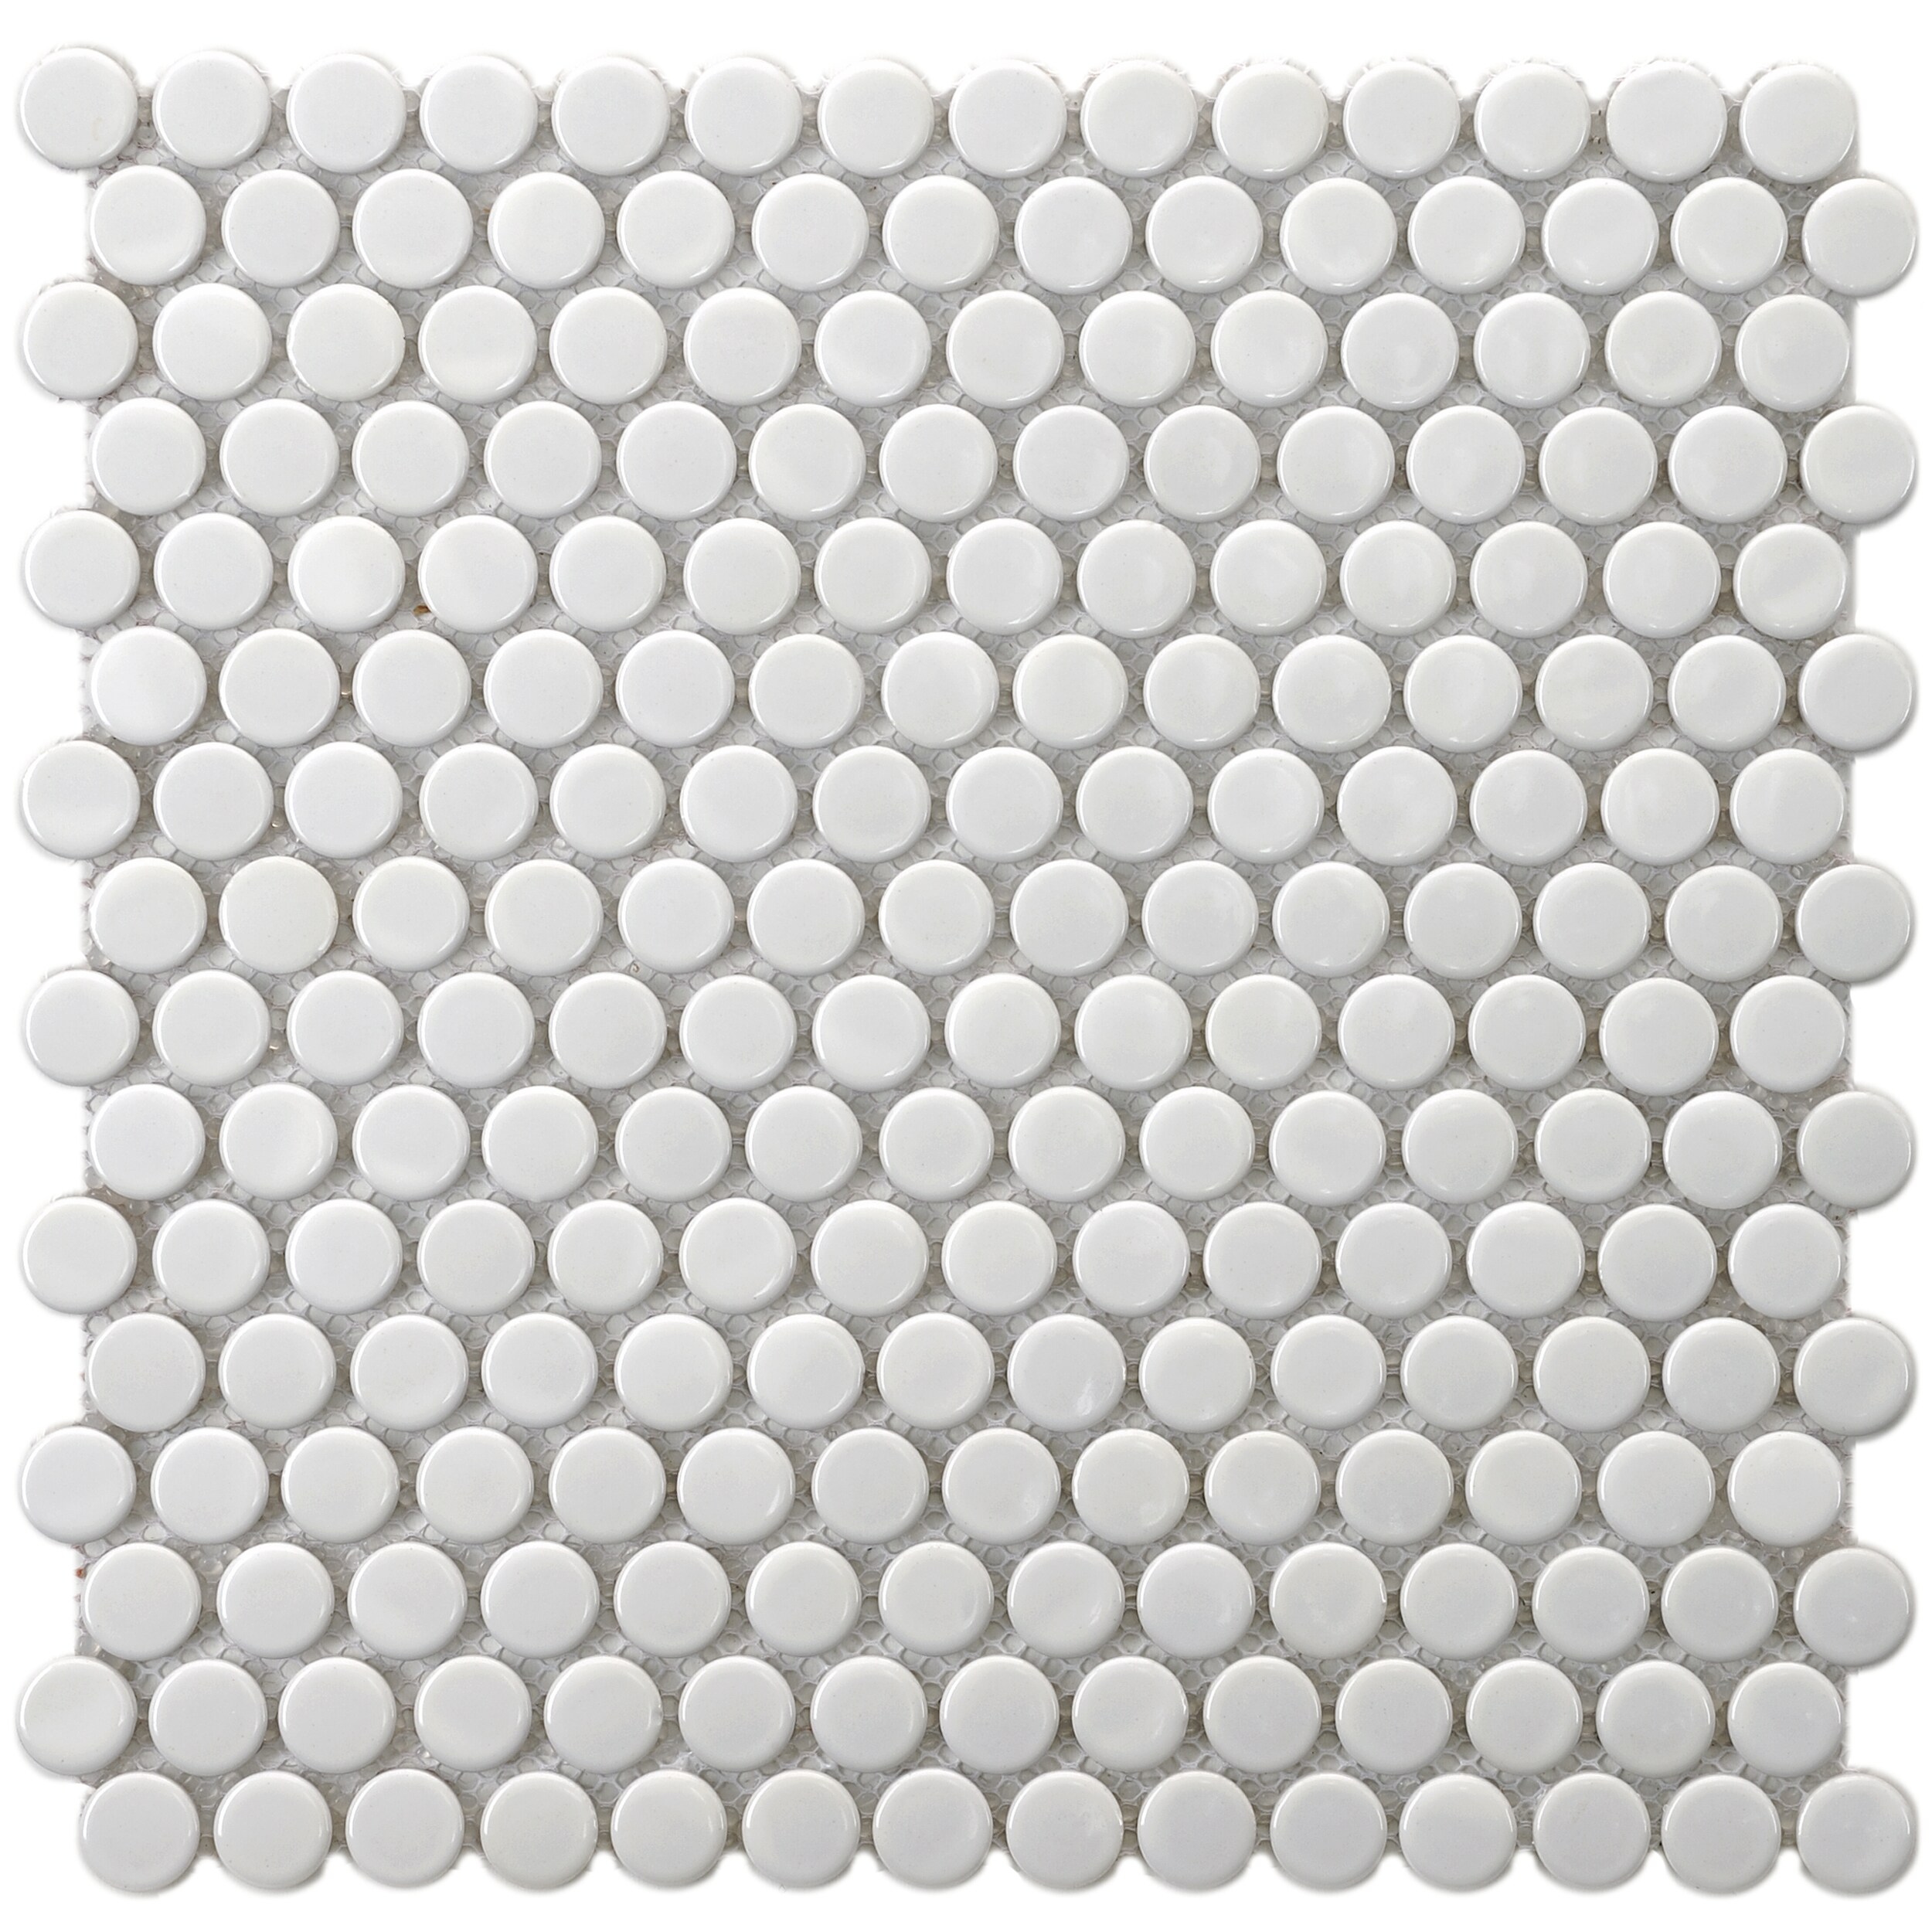 Somertile 11.5x11.5 in Victorian Penny 3/4 in White Porcelain Mosaic Tile (pack Of 10)